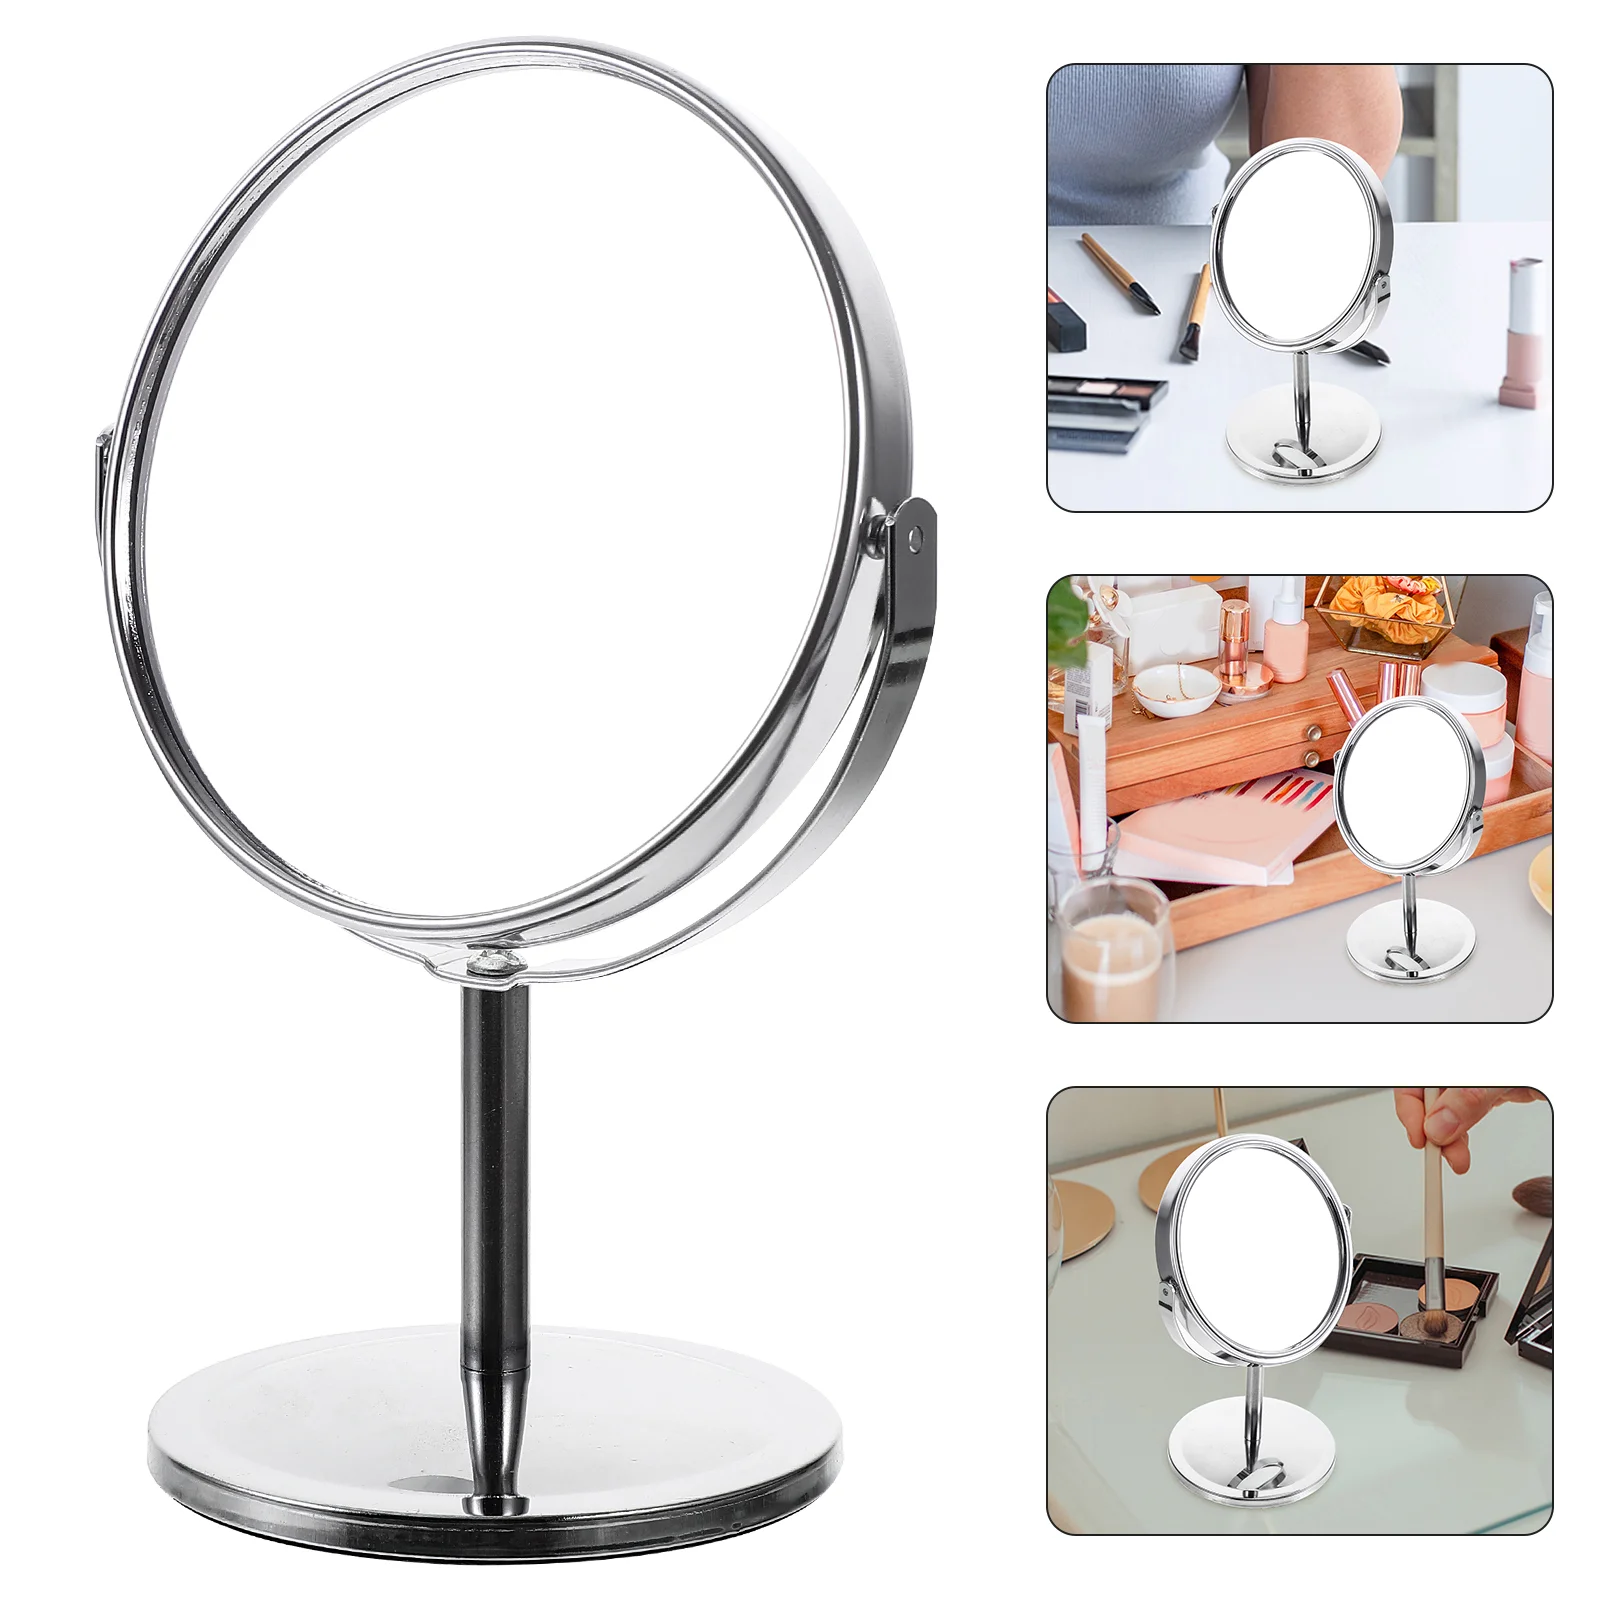 

Desk Mirror 360 Haircuts Men Makeup Personal Mirrors Vanity Table Tabletop Round Hairstyle for